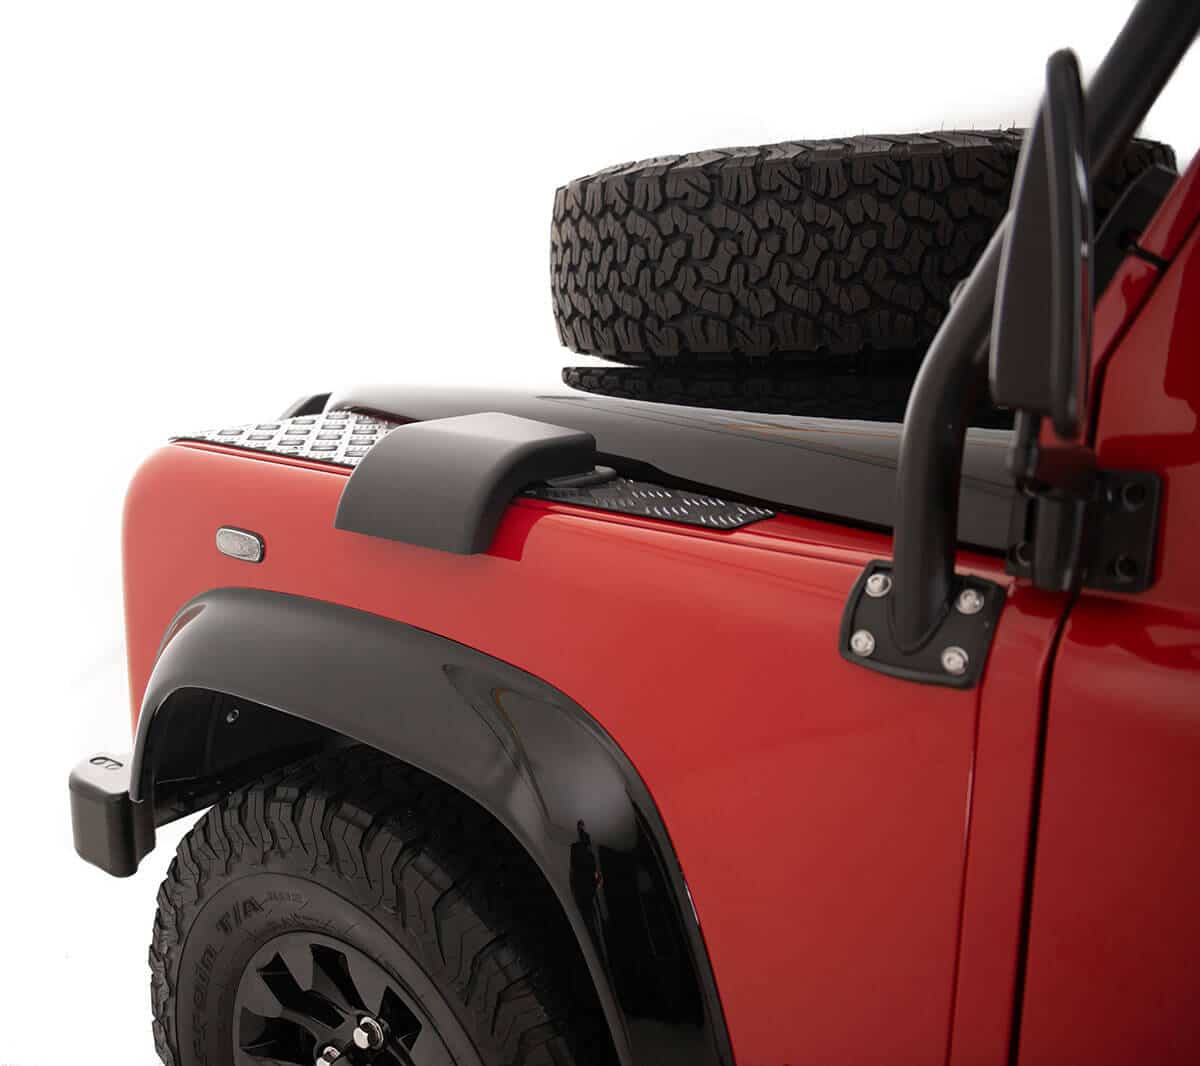 Land Rover Defender D110 - Exterior Detail: Spare Tire Storage on Hood